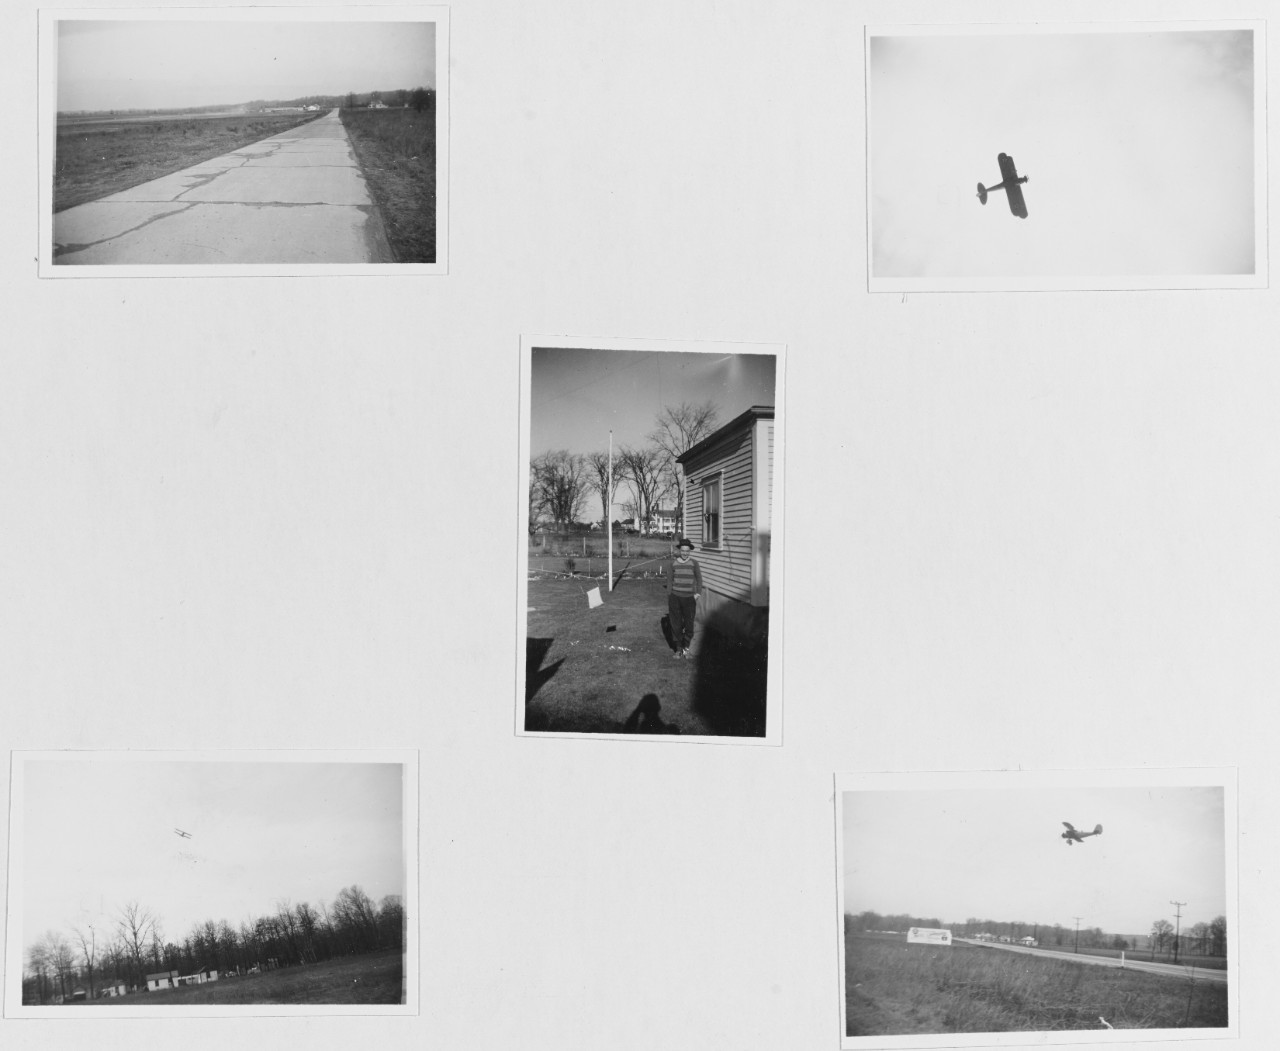 Prints of Naval Training field and planes (N3N's) at Hybla Valley, Alexandria, Virginia